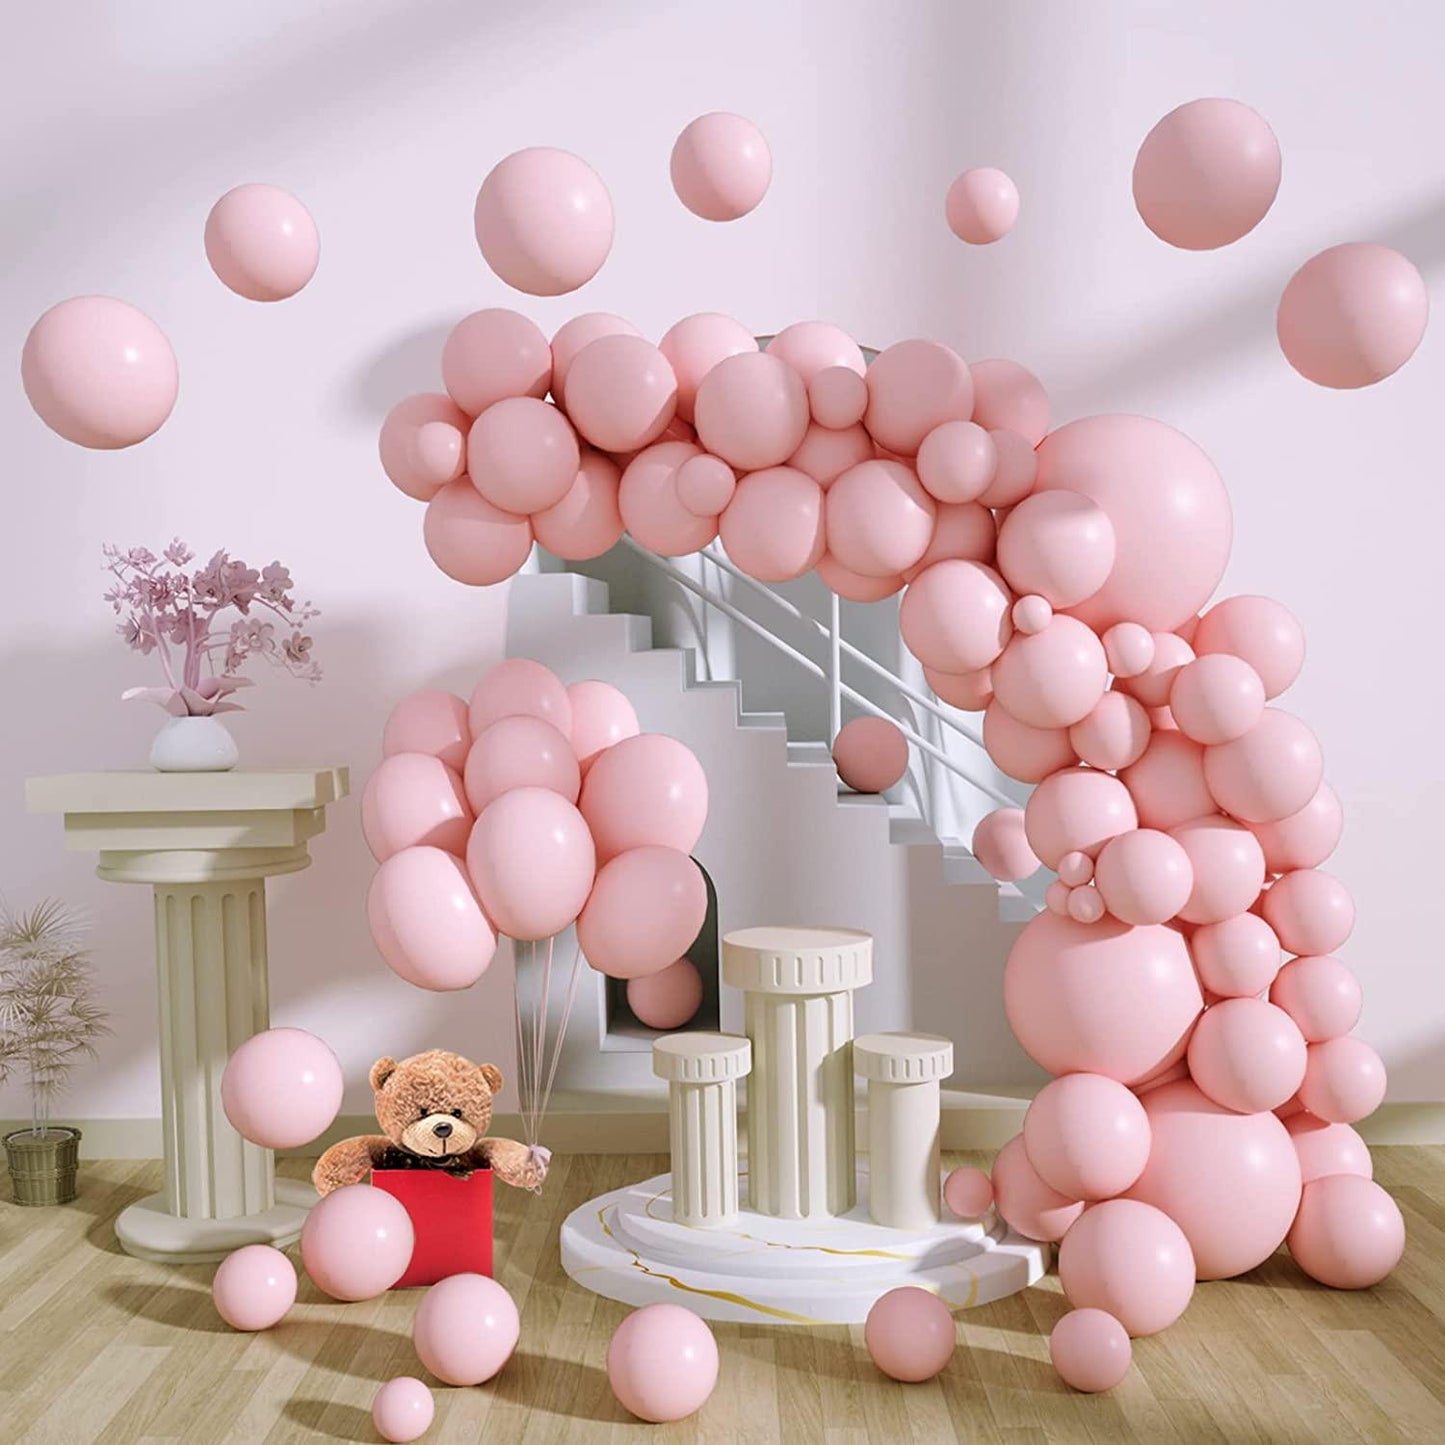 100Pcs 18"+12"+10"+5" Ballons Balloon Arch Kit as Birthday Party Balloons Gender Reveal Balloons Baby Shower Balloons Wedding Anniversary - If you say i do